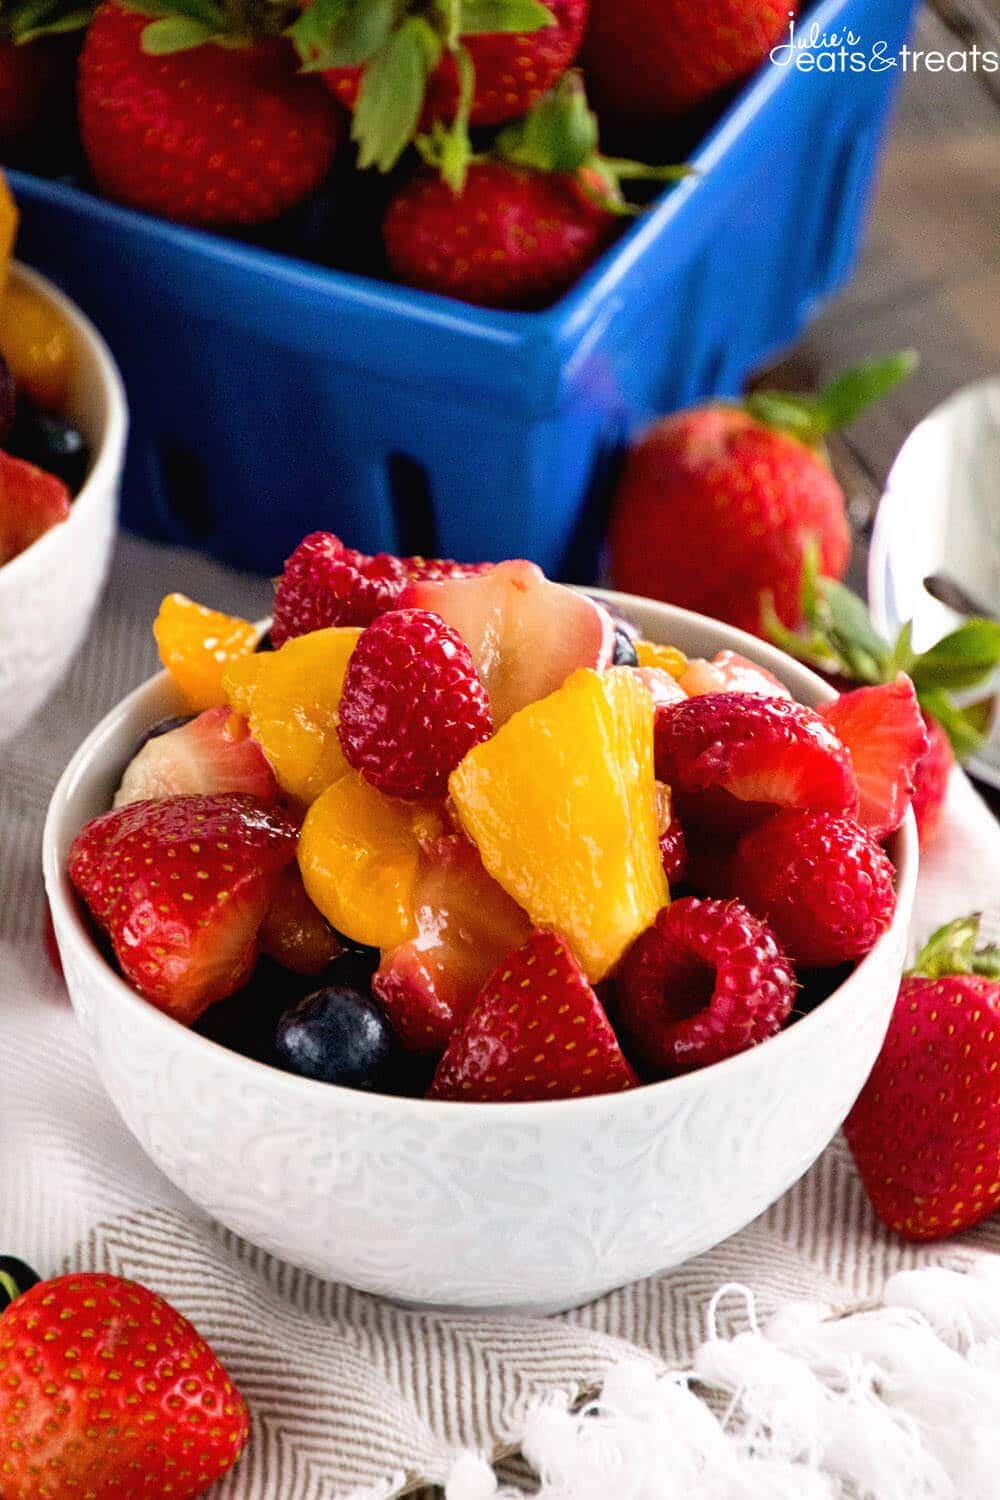 Easy Fruit Salad ~ Simple and Delicious Fresh Fruit Salad Recipe Using Vanilla Pudding Mix!